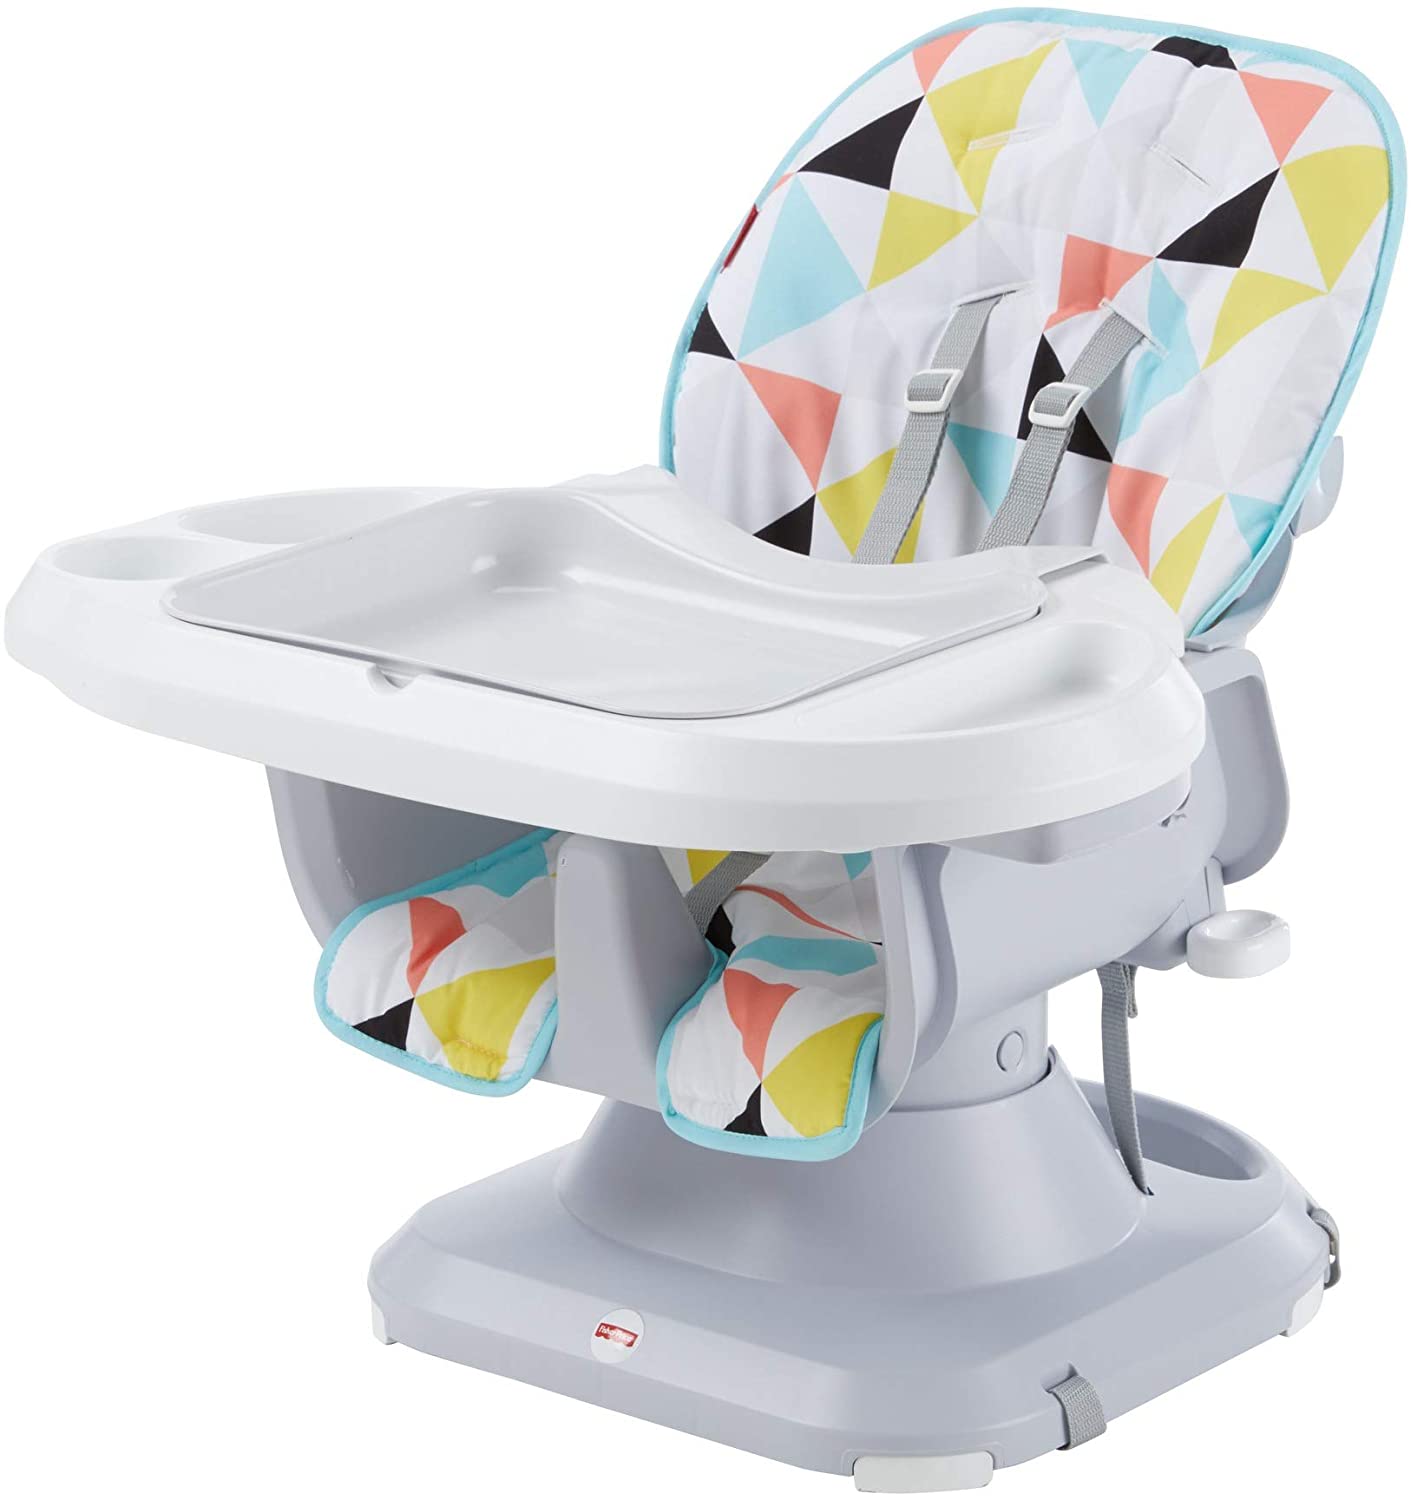 Fisher Price SpaceSaver high chair - Chicago Feeding Group